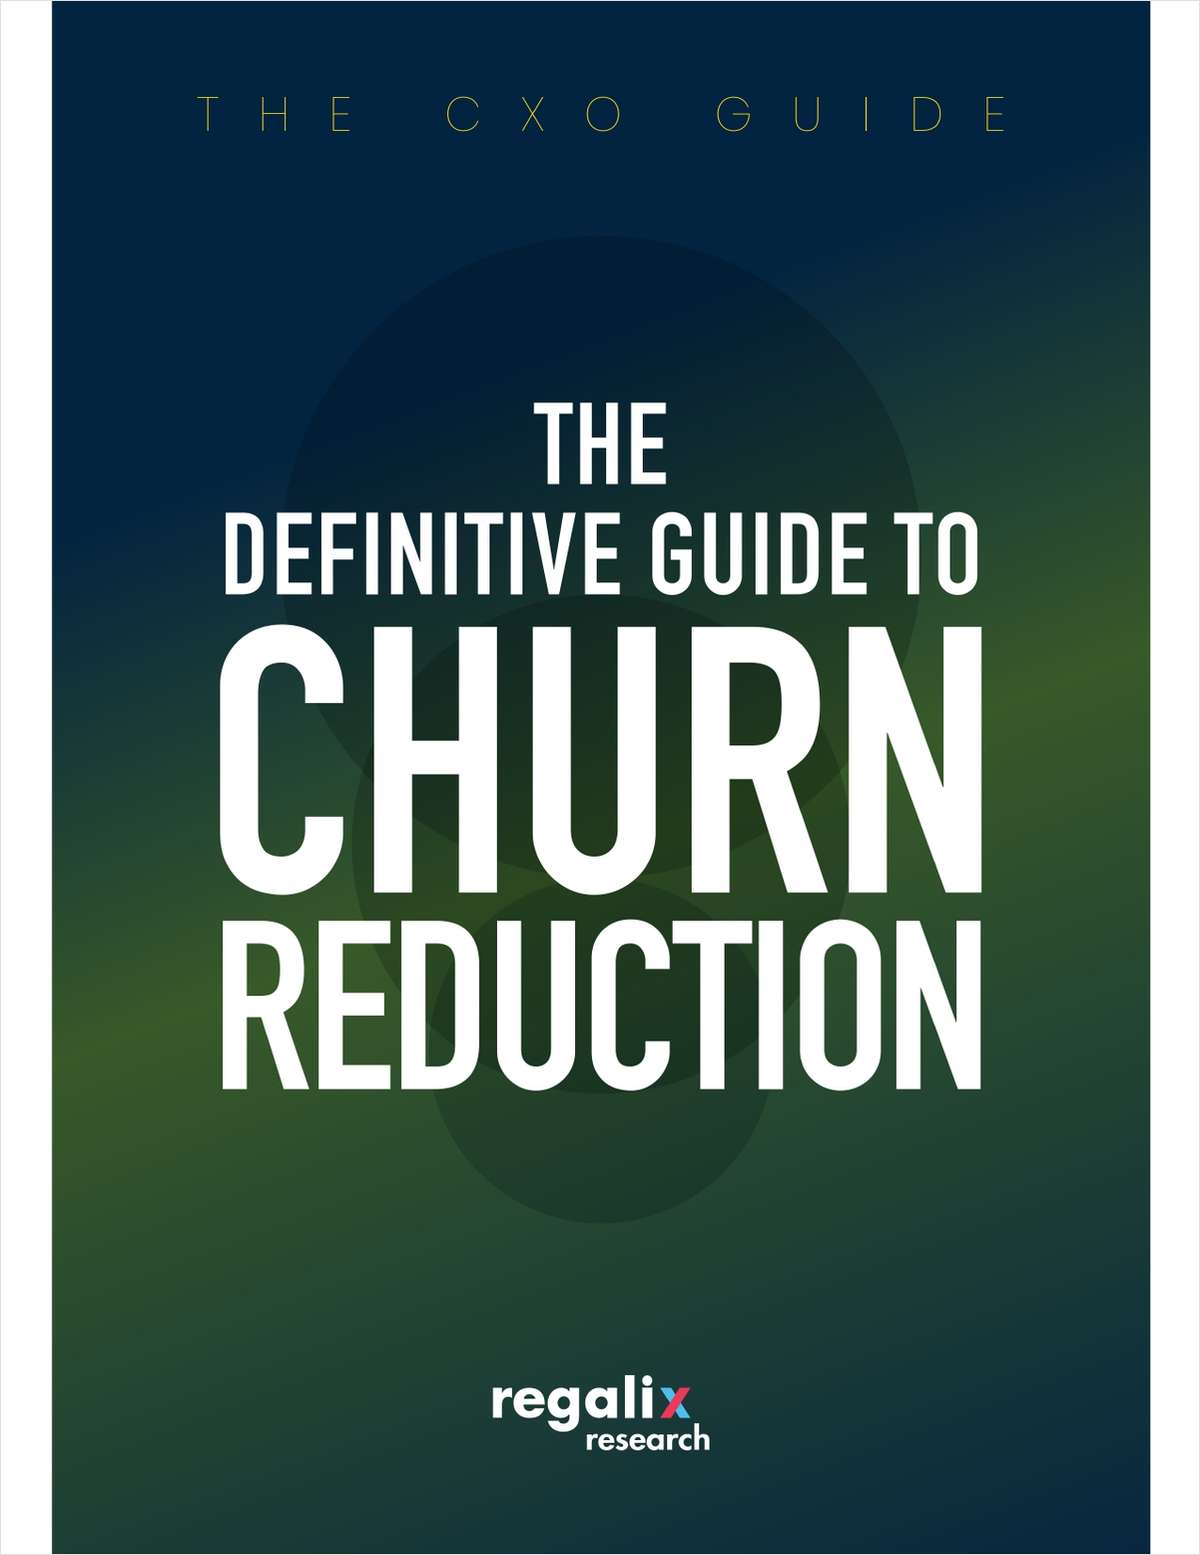 The Definitive Guide to Churn Reduction